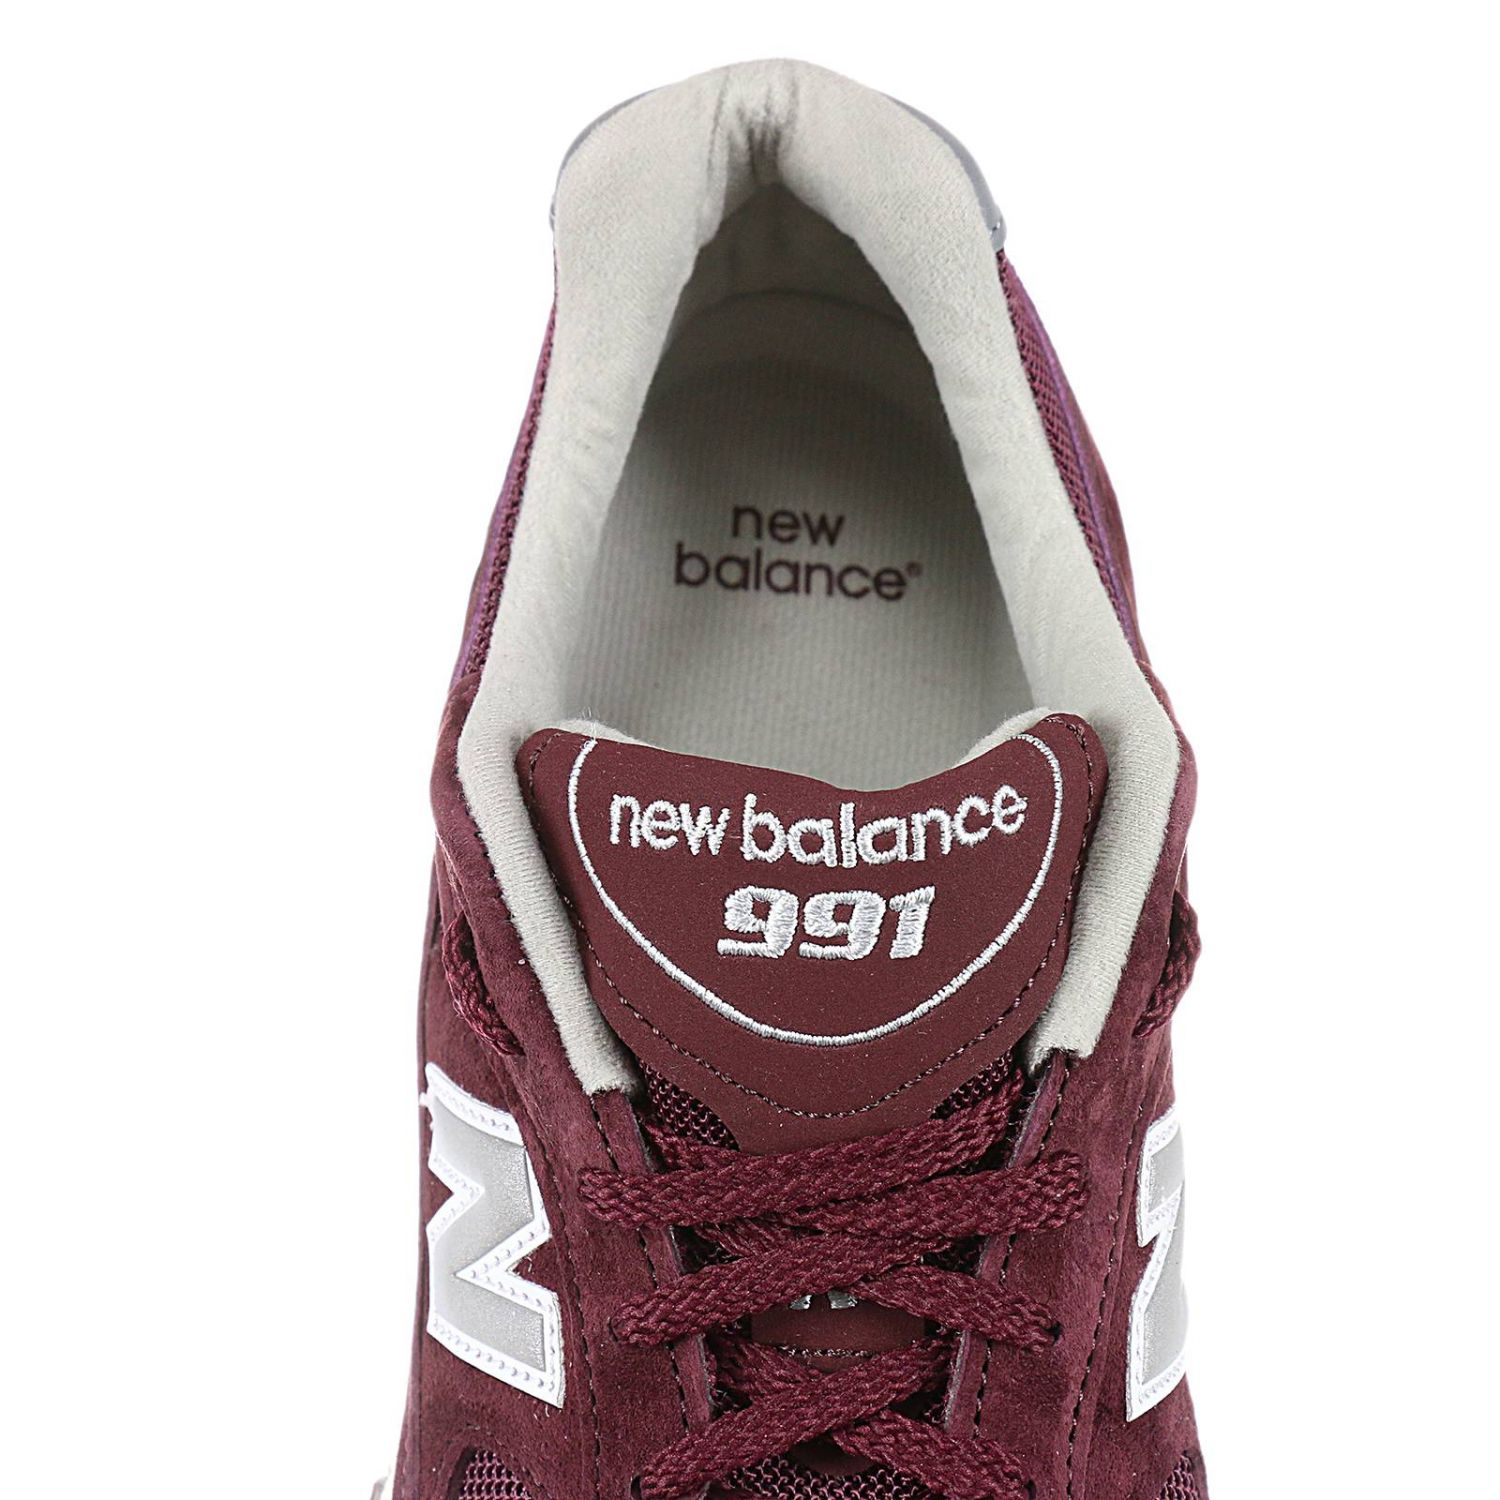 New Balance Outlet: Sneakers limited edition 991 camoscio e rete ...